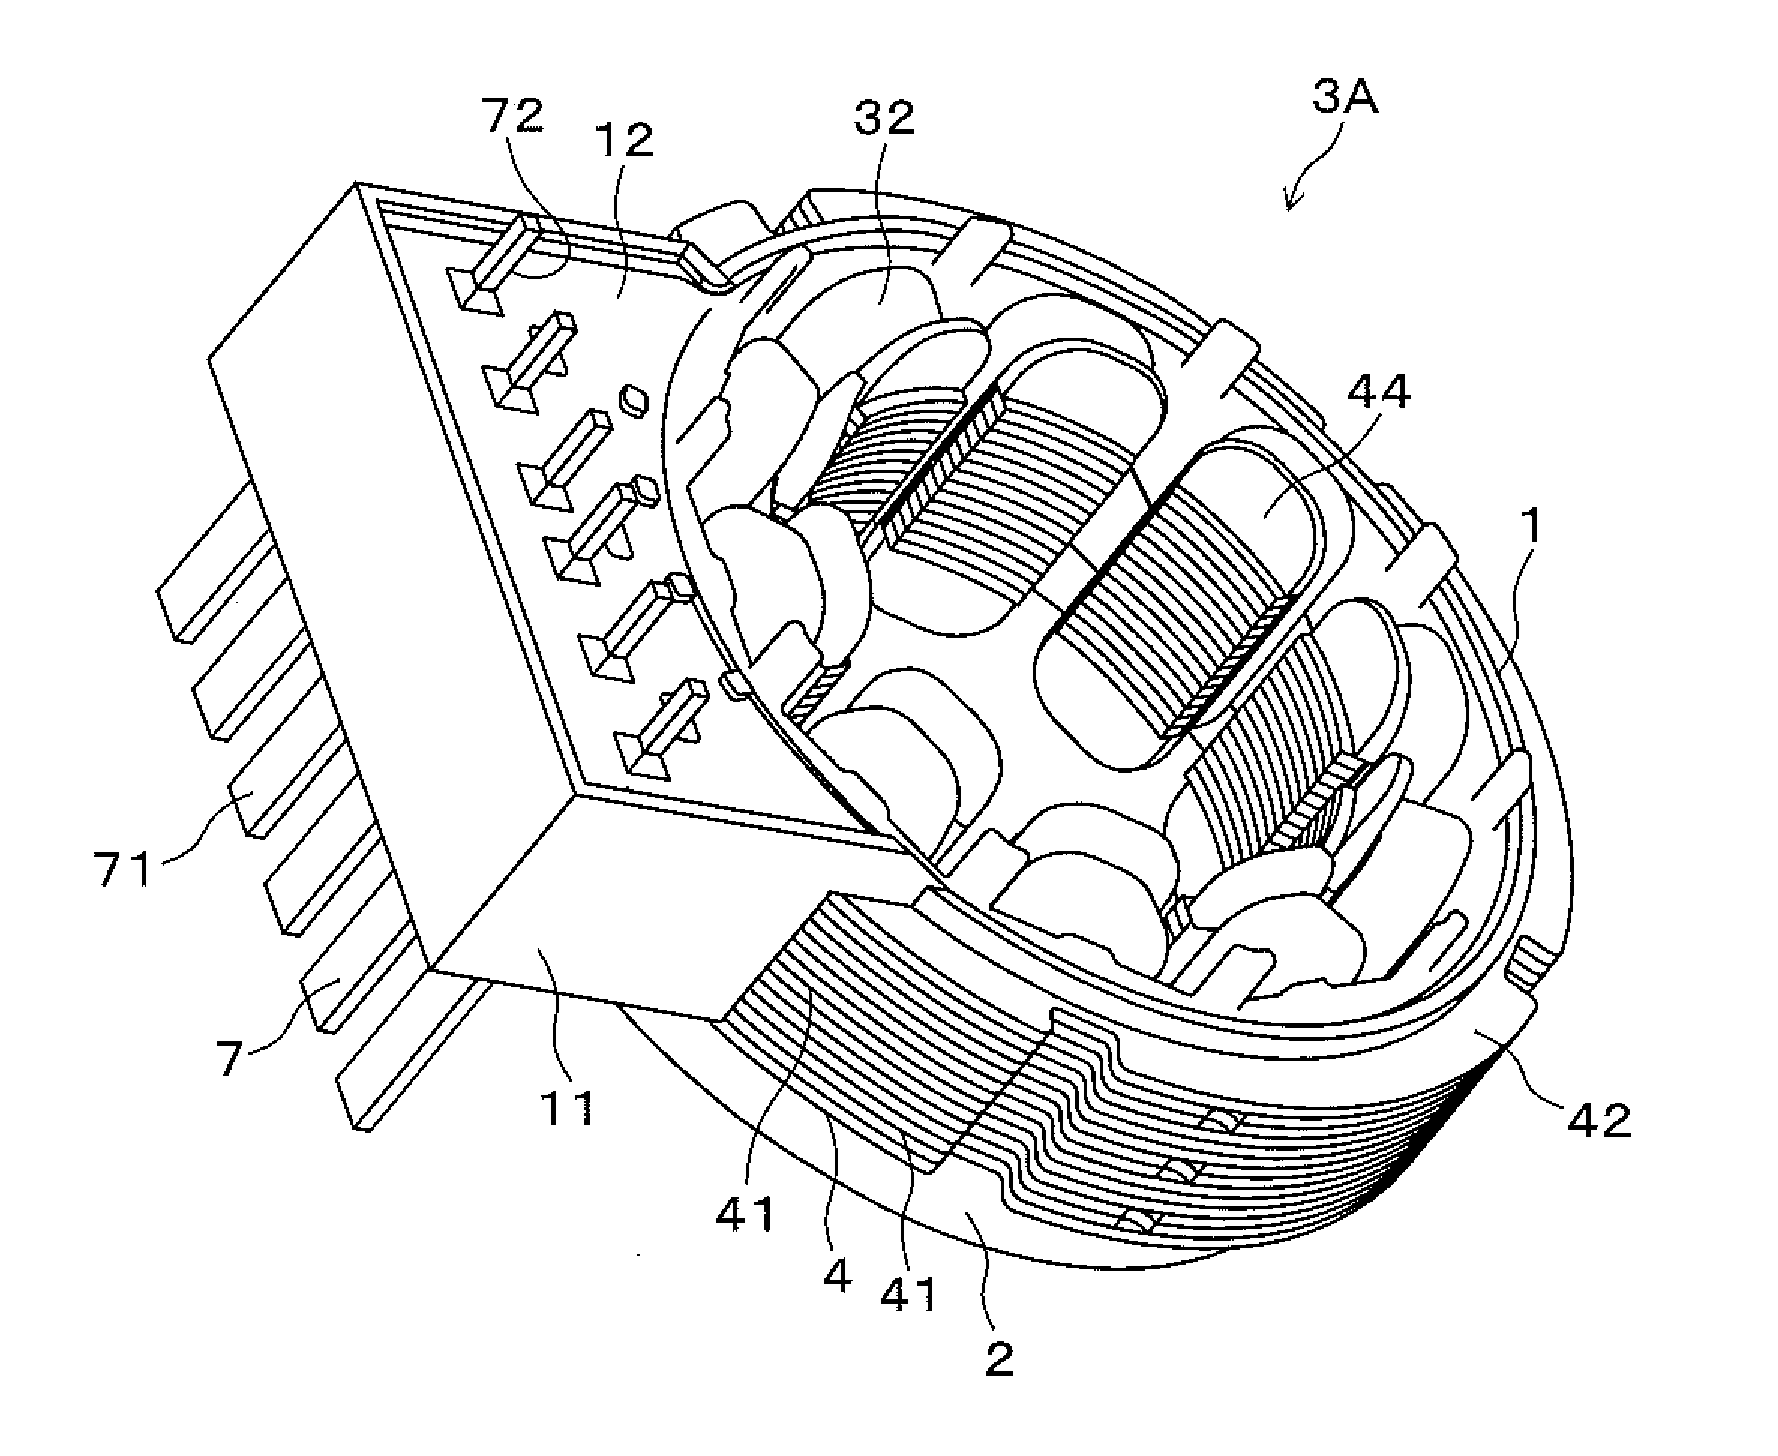 Terminal block structure and stator for resolver